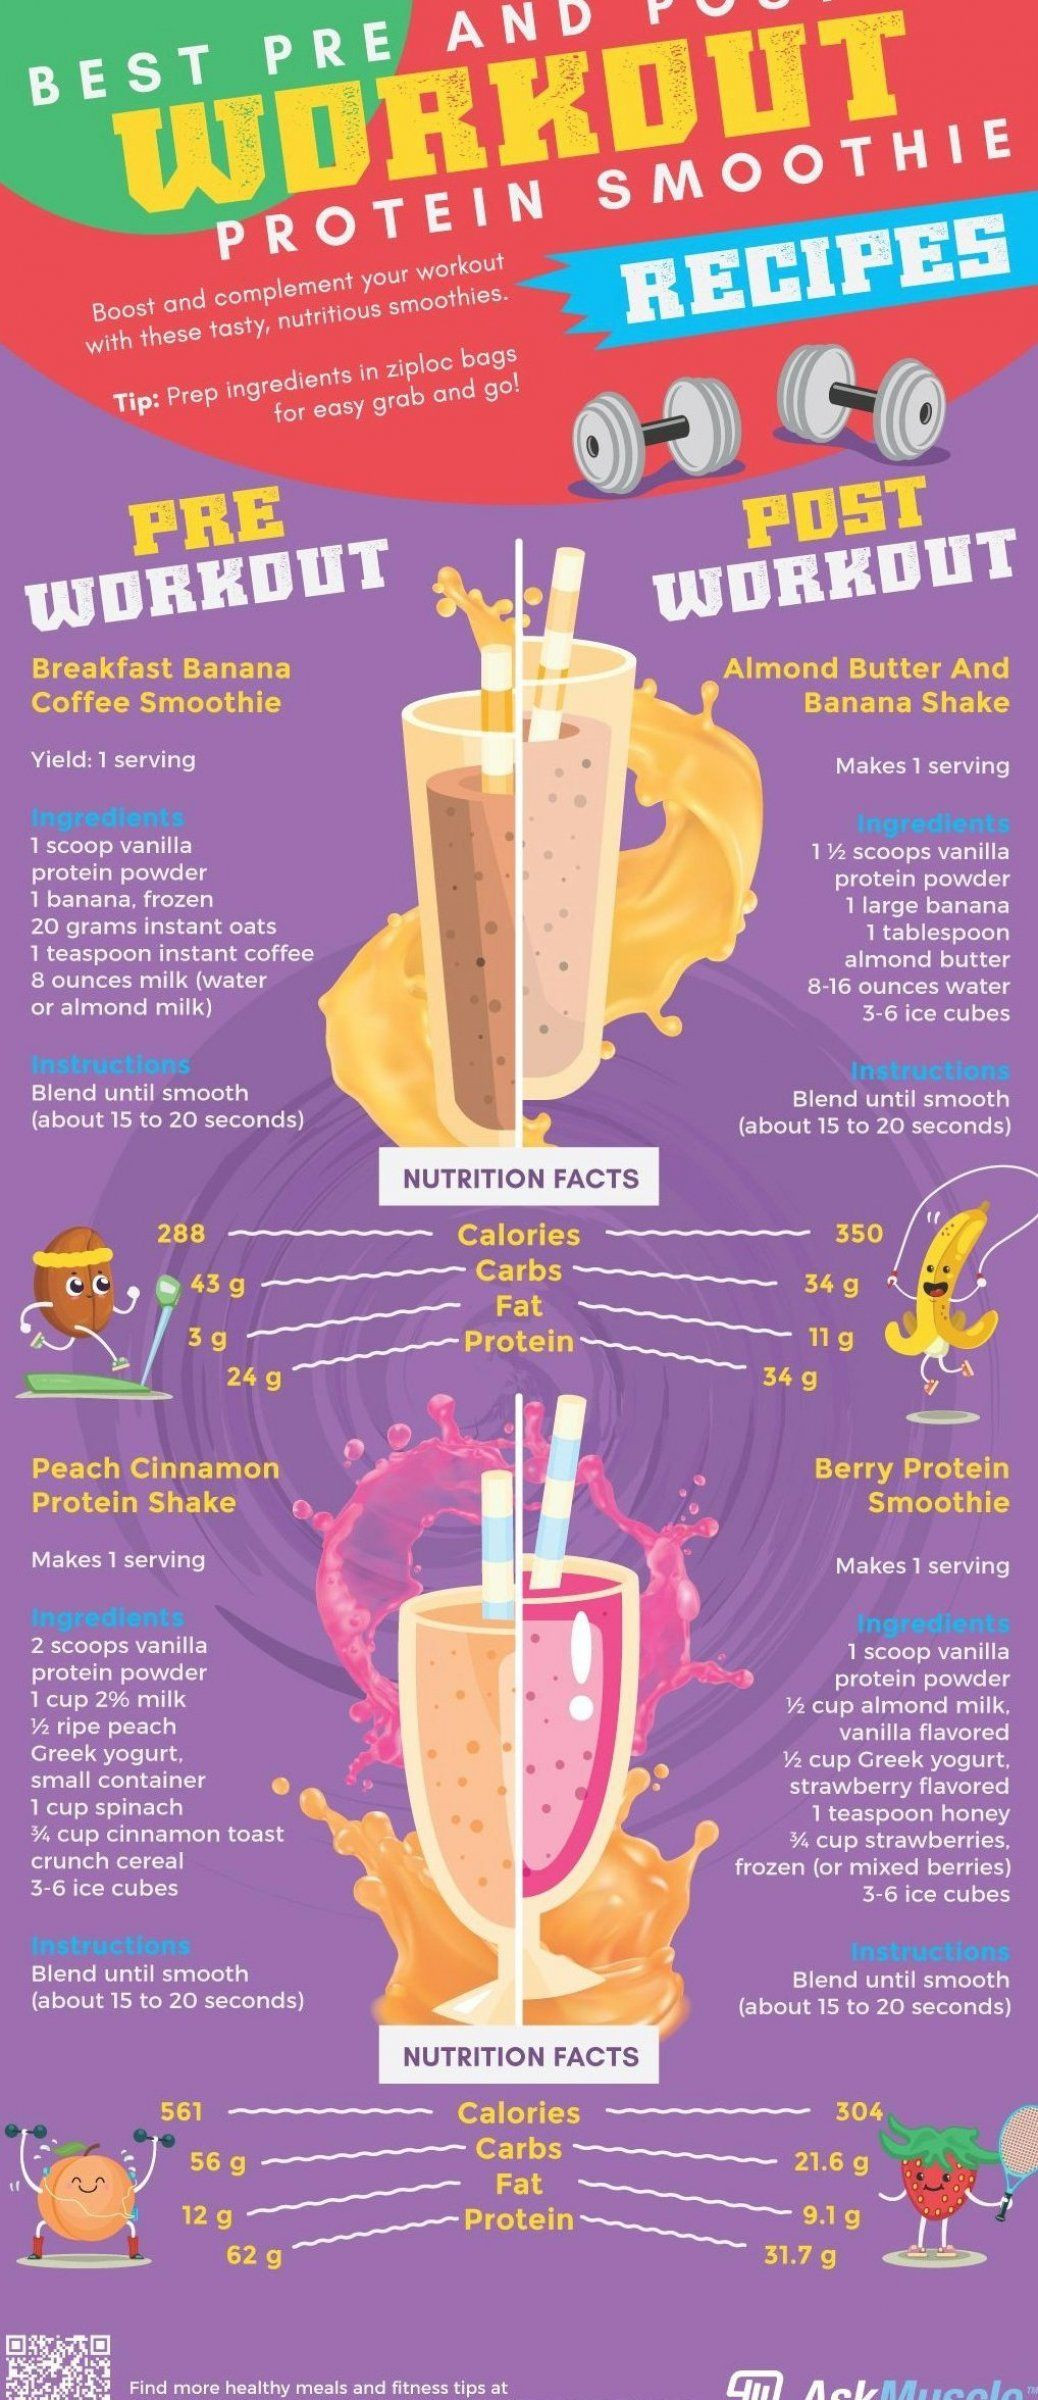 Pre Workout Smoothie Recipes
 infographic Best Pre And Post Workout Protein Smoothie